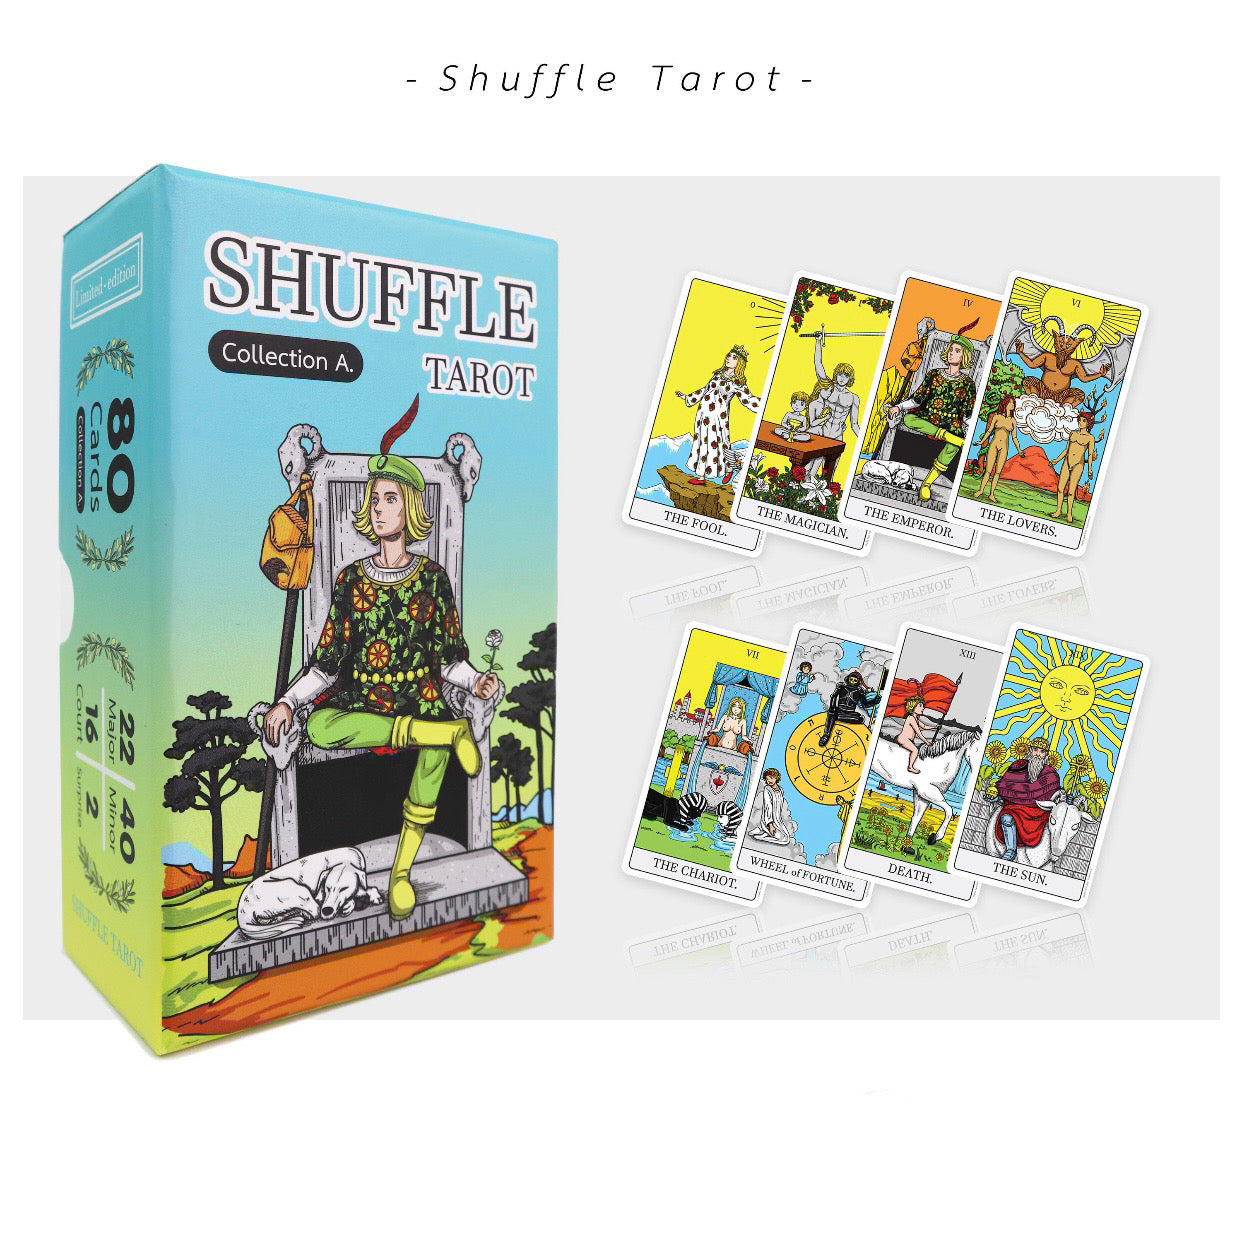 Here's Everything You Need To Know About Shuffling Your Tarot Deck